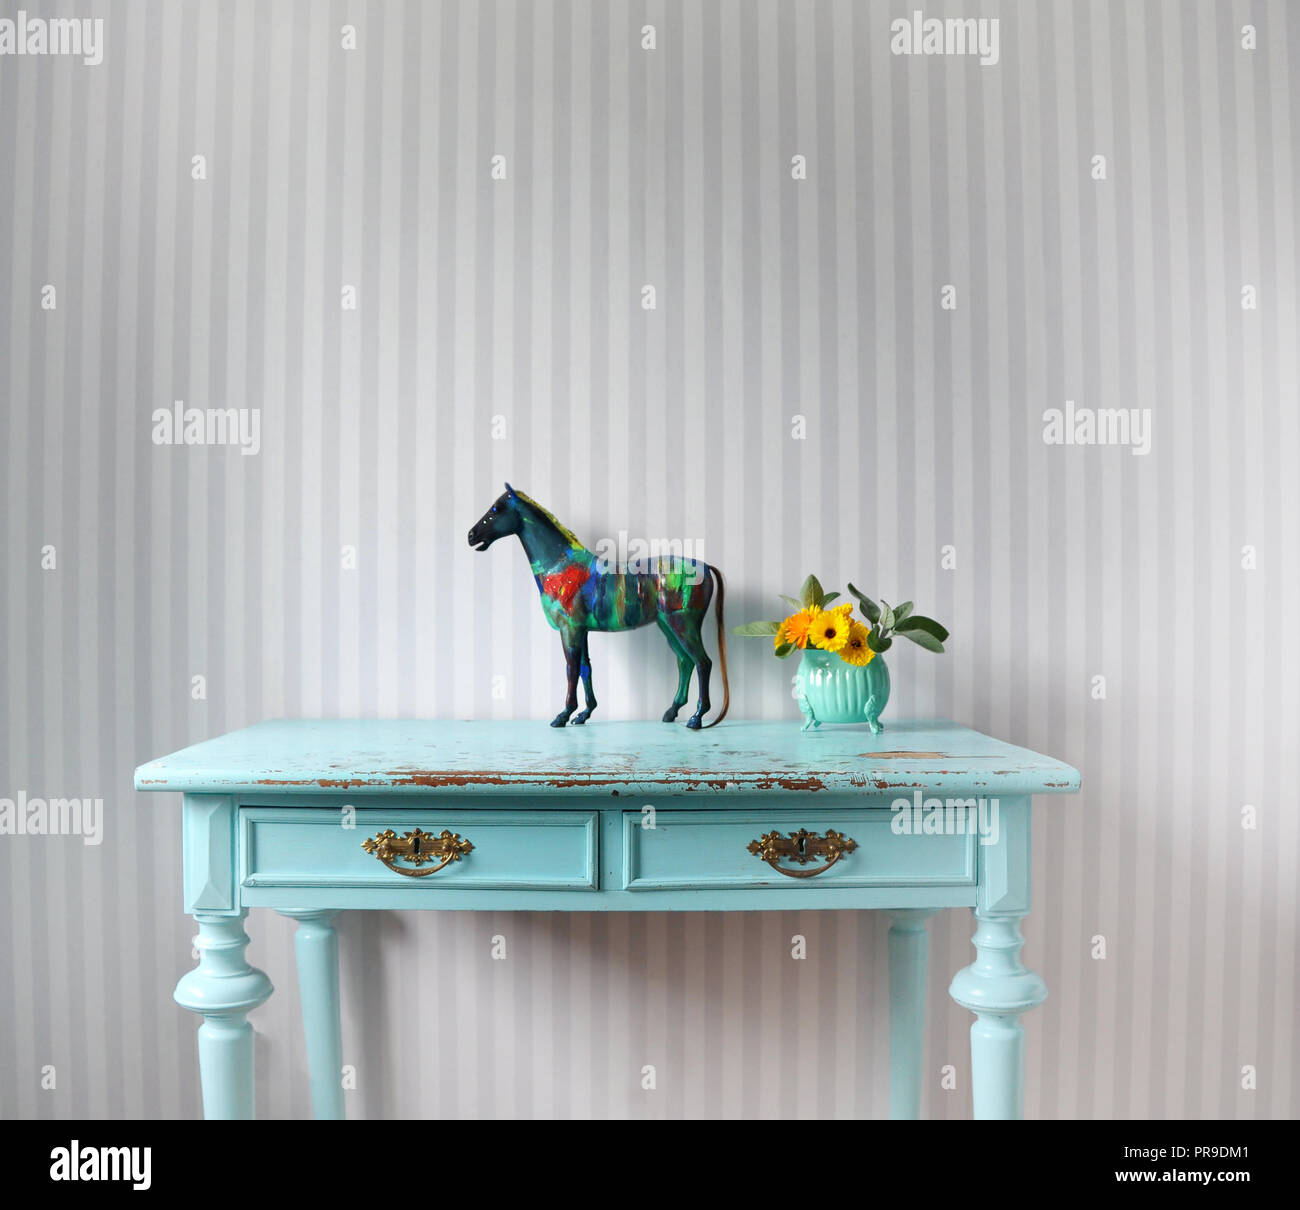 Vintage interior - Turquoise desk and grey striped wallpaper. Recycled plastic horse made new with acrylic colors. Marigolds in a vase. Stock Photo